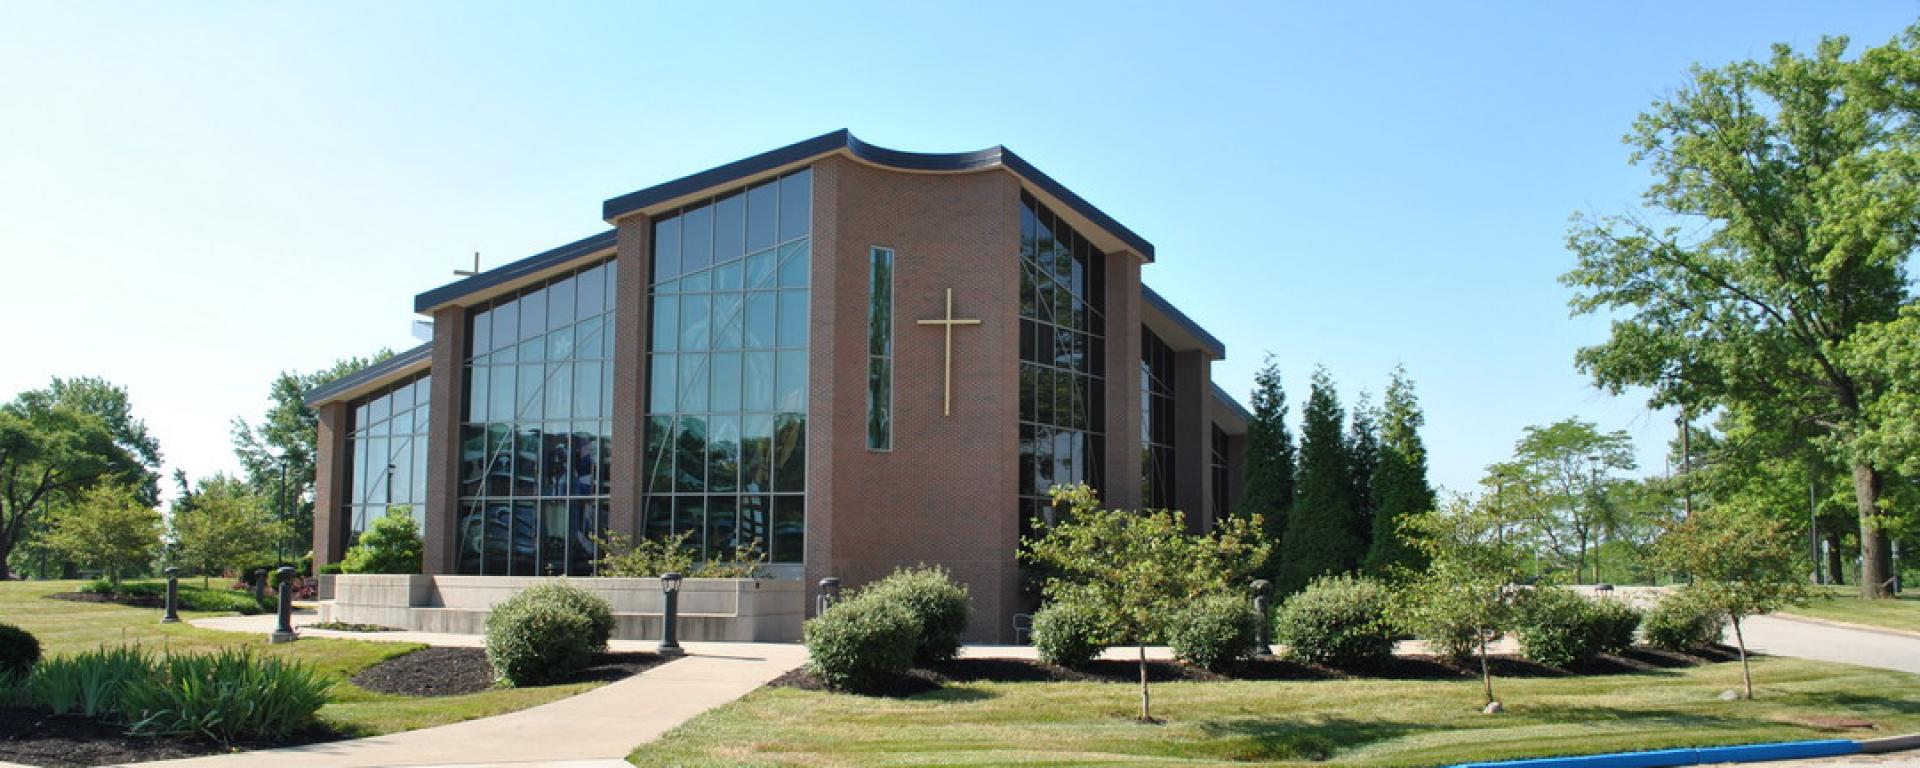 landscaping and side profile of chapel